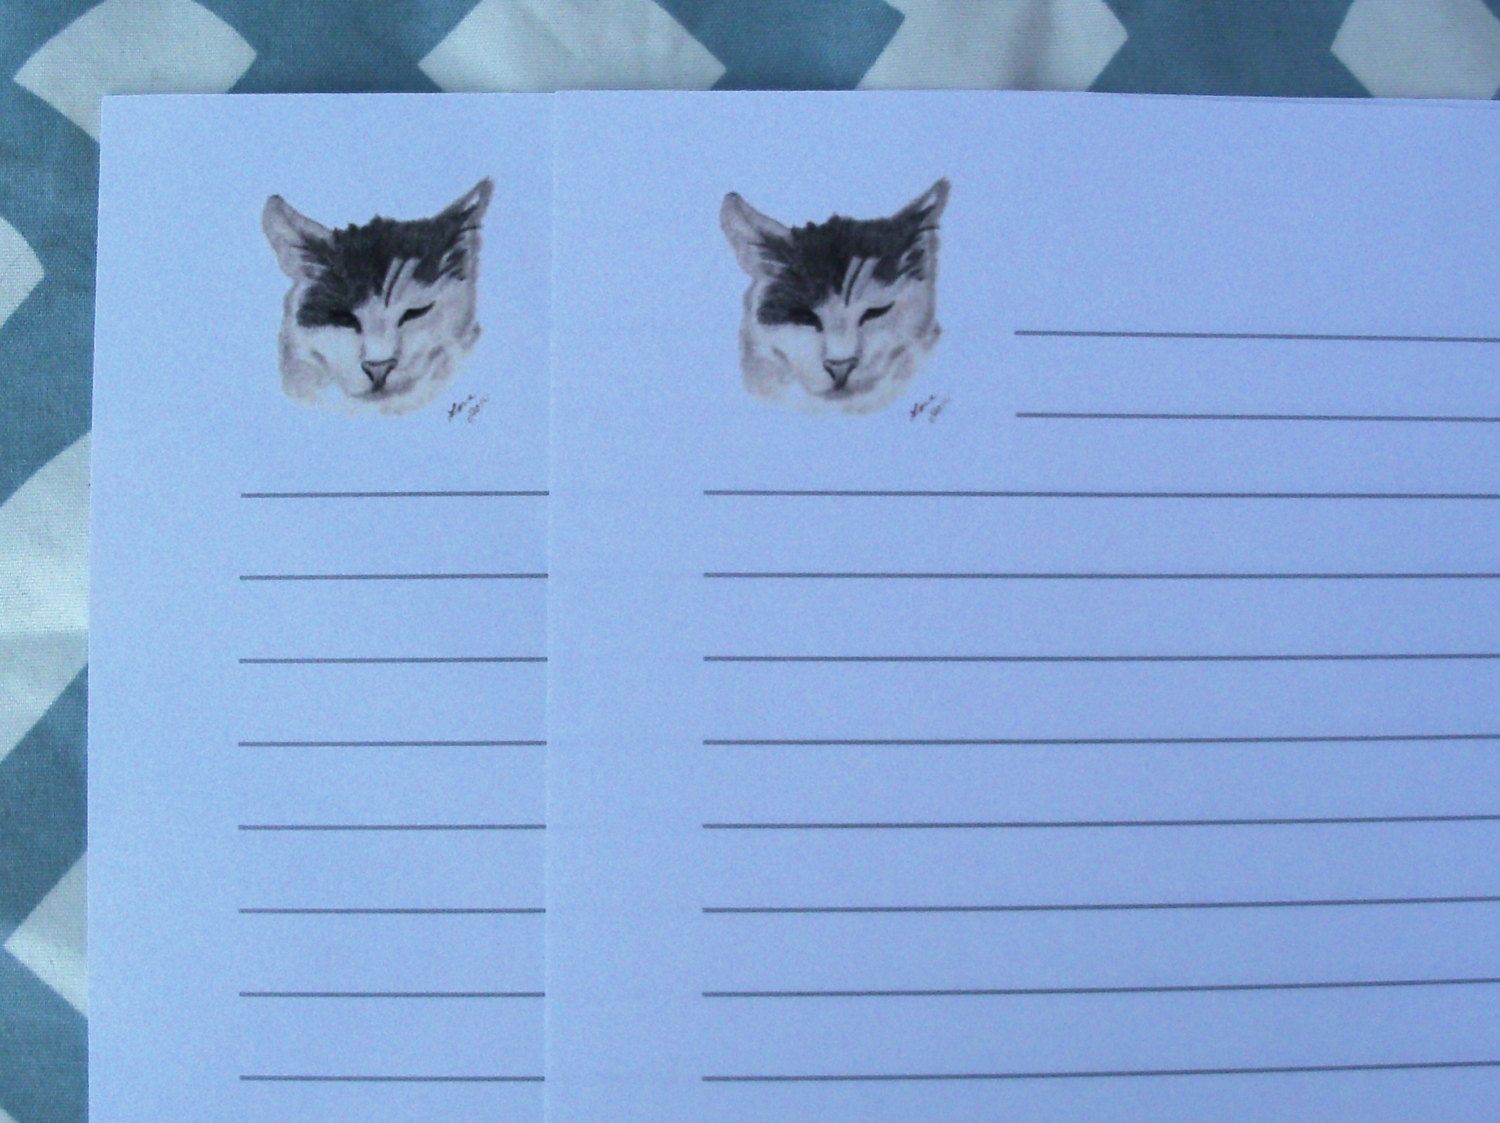 Cat Papercraft Stationery Letter Sheets Lined Stationery Sheets Kitten